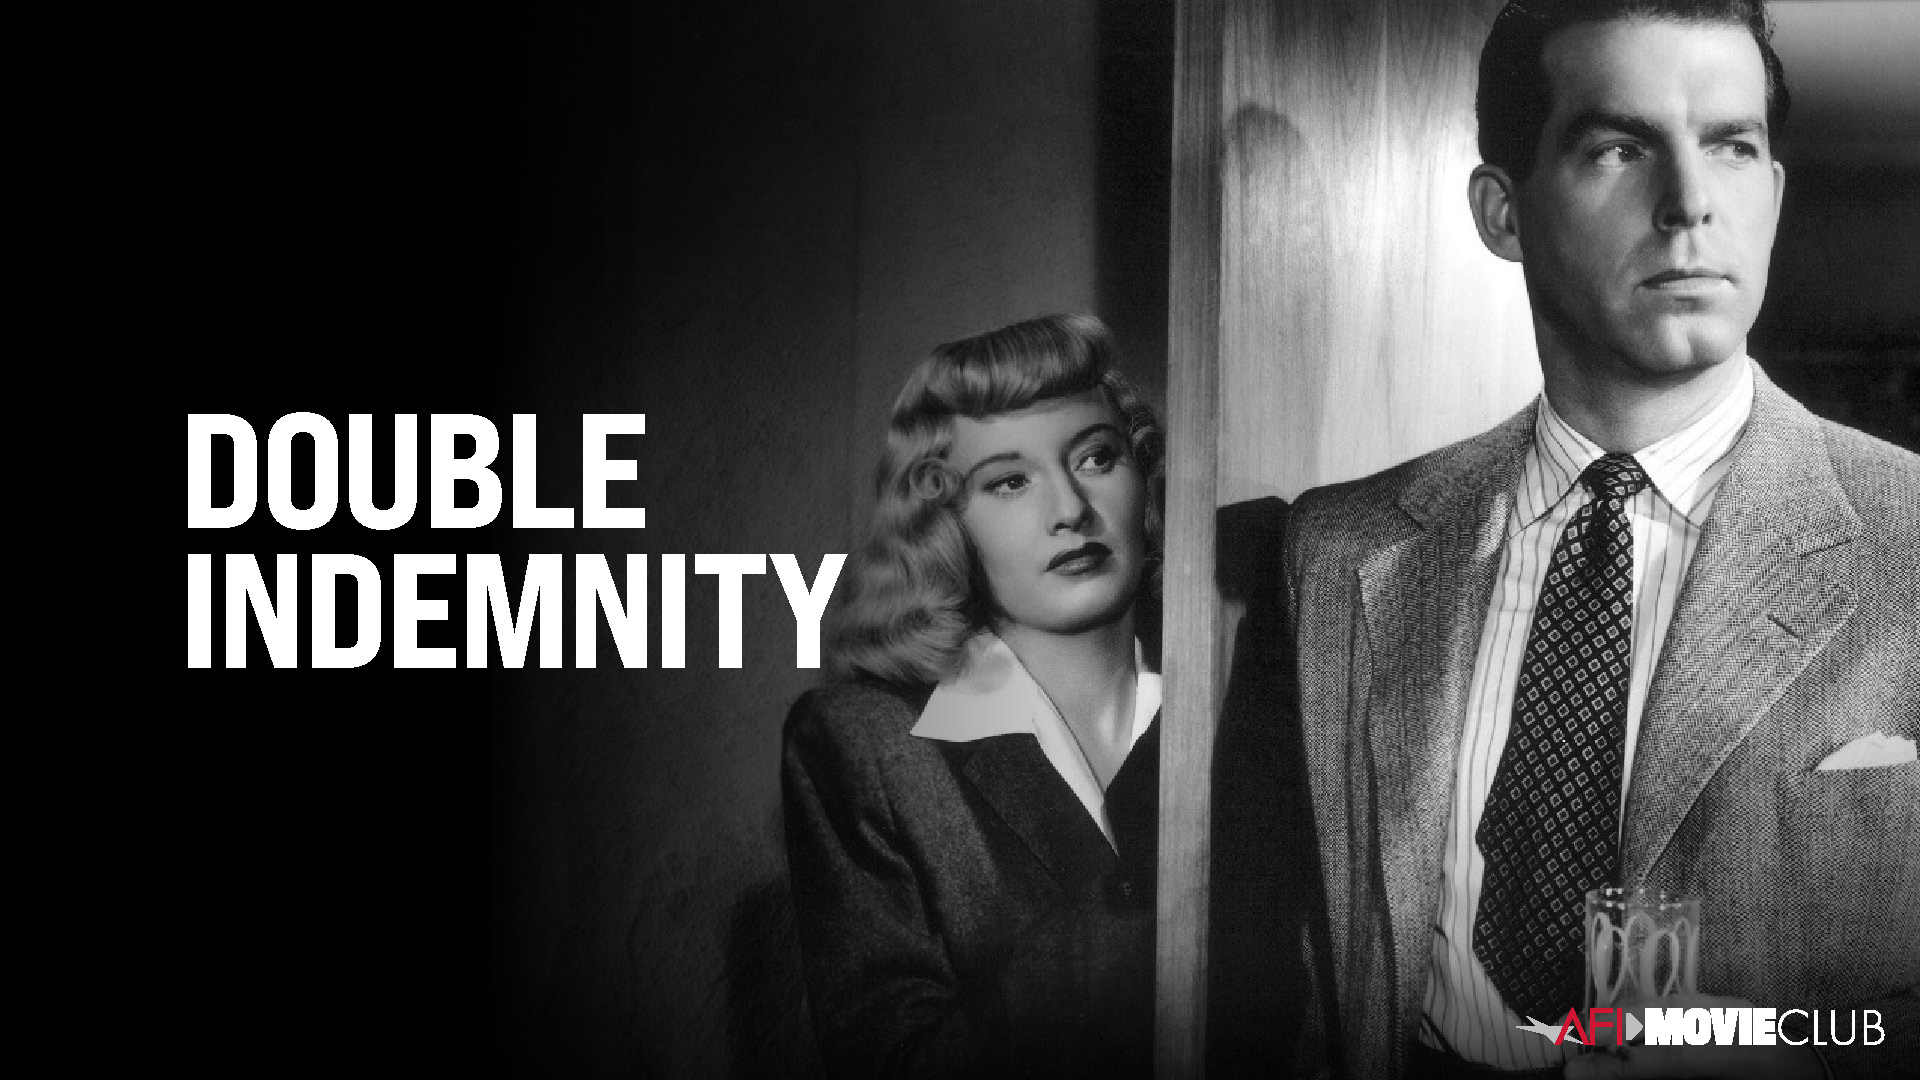 Double Indemnity Film Still - Barbara Stanwyck and Fred MacMurray